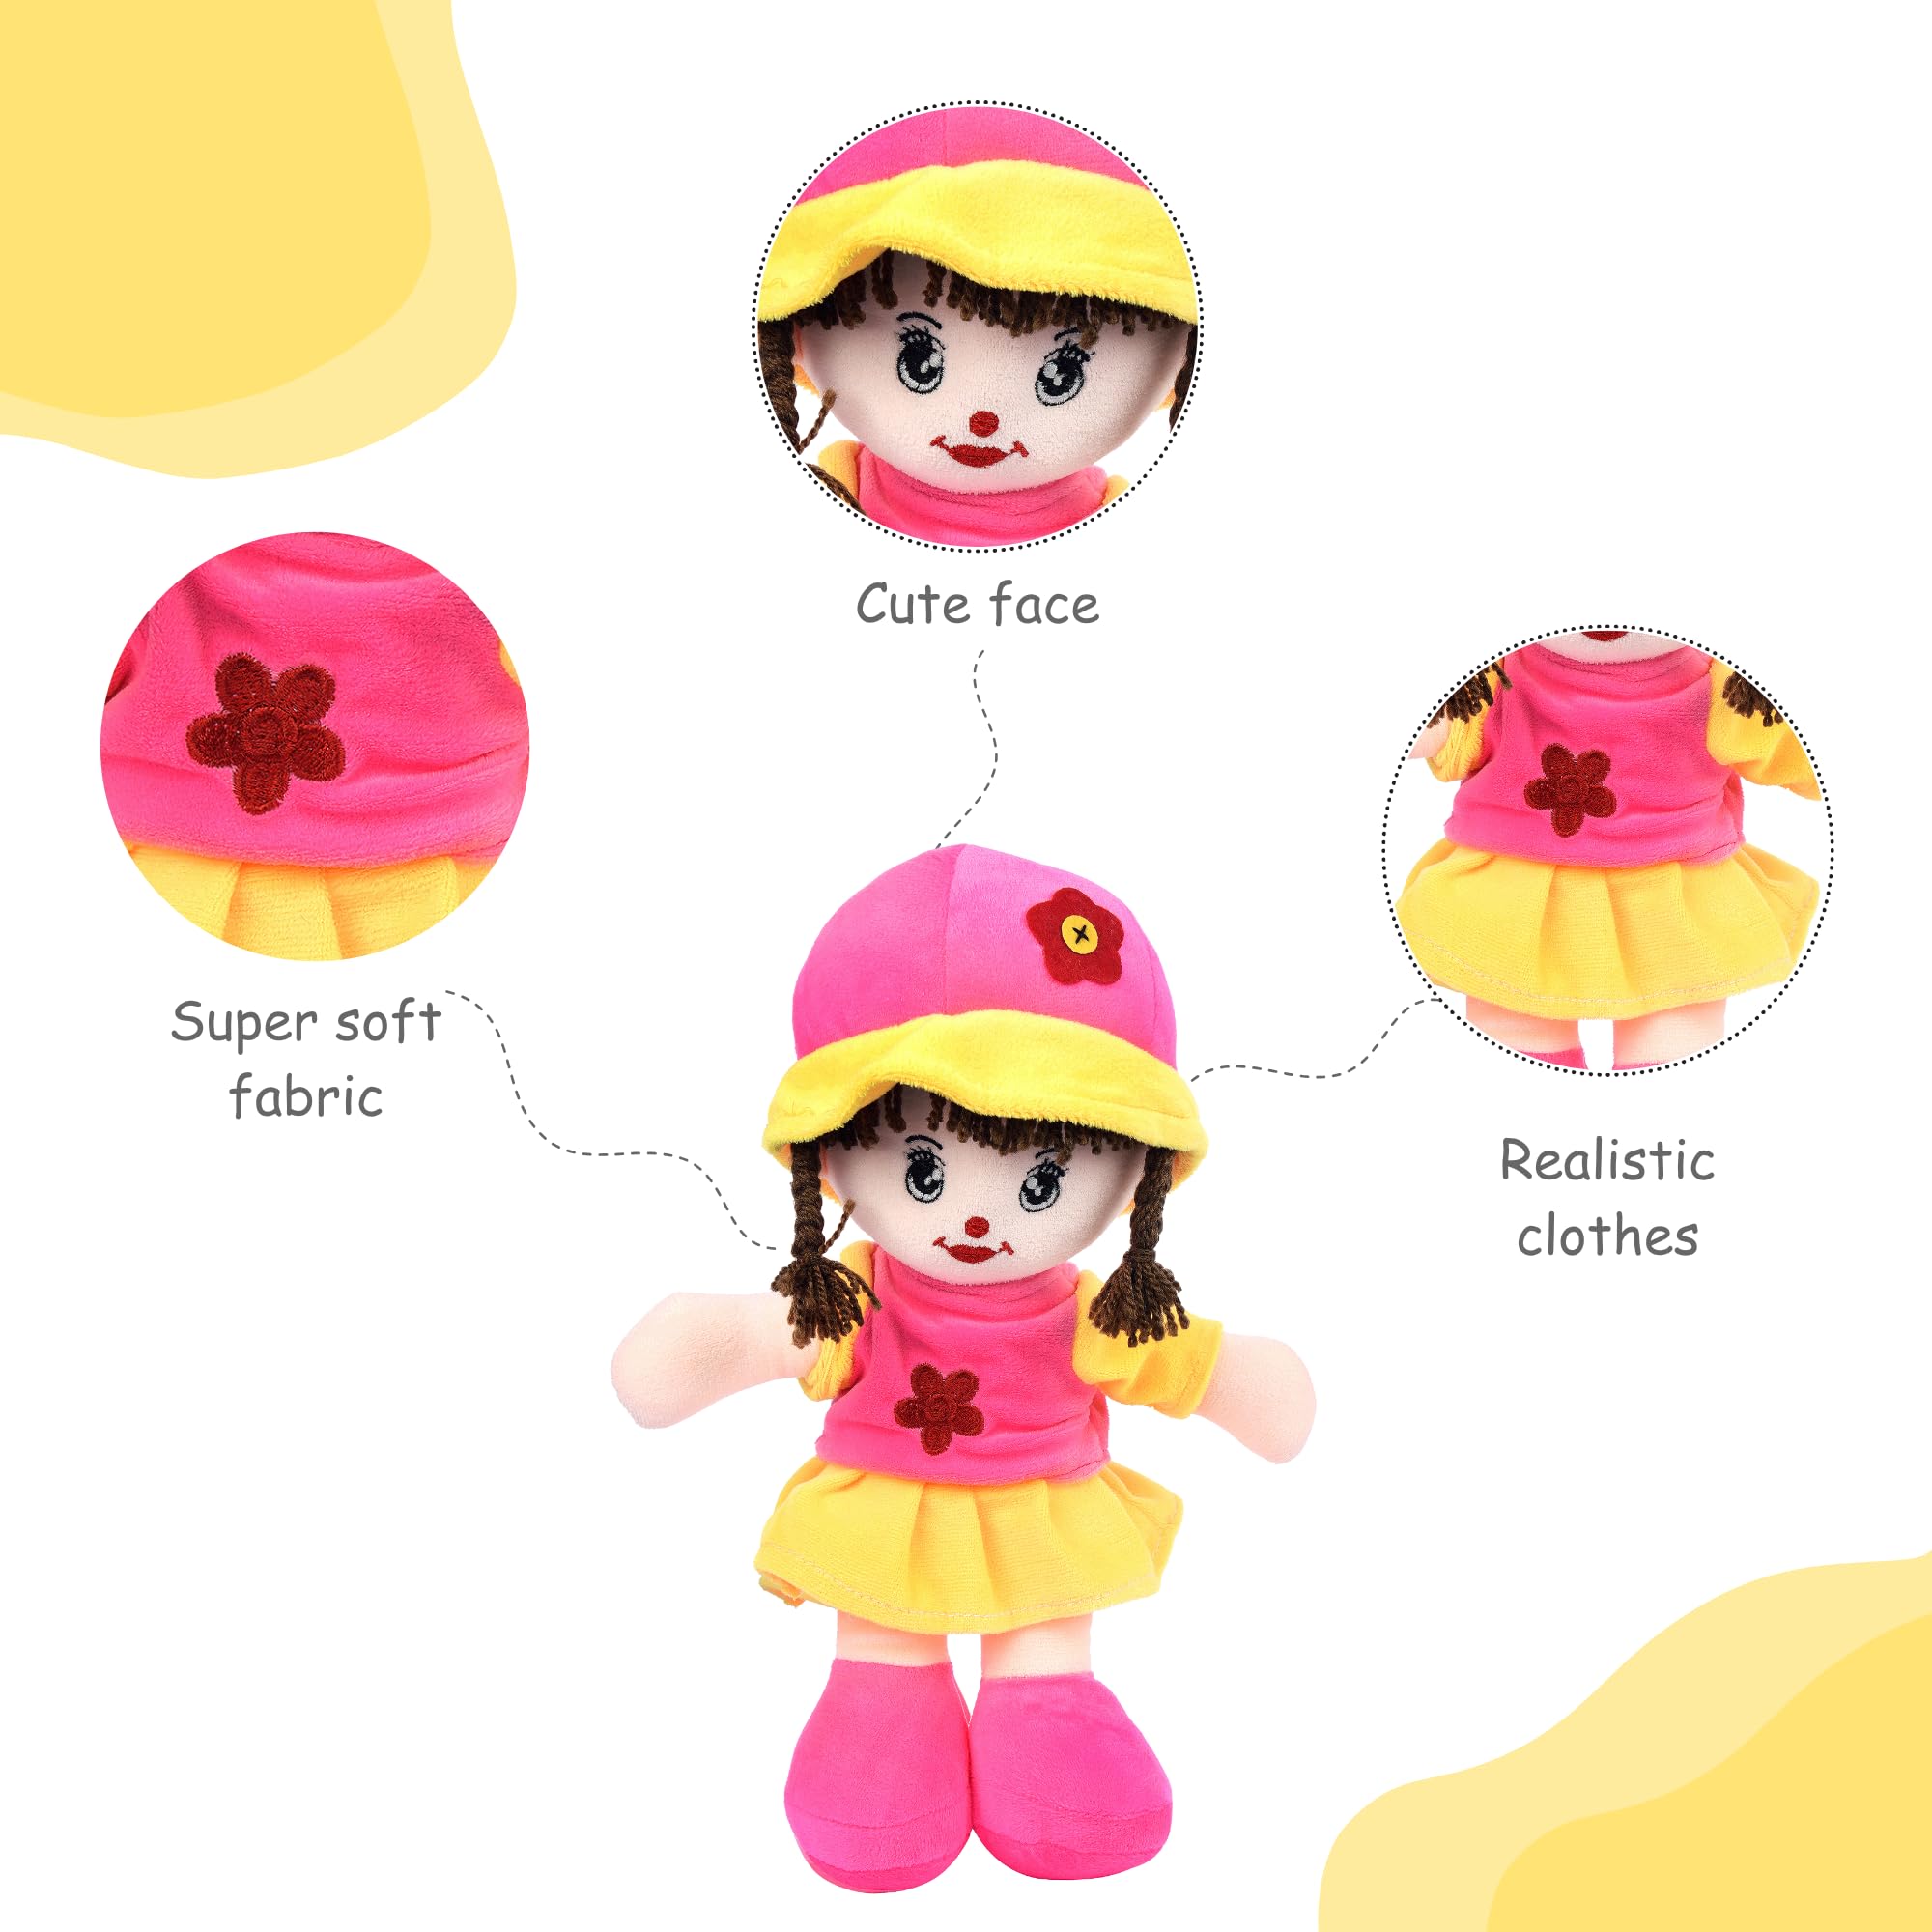 Addie Girl Rag Doll 35cm for Kid Huggable & Adorable Plush for Toddlers | Baby Doll with Hat & Skirt for Girls | Soft & Cuddly Stuffed Toy for Babies | Made in India (Rani)